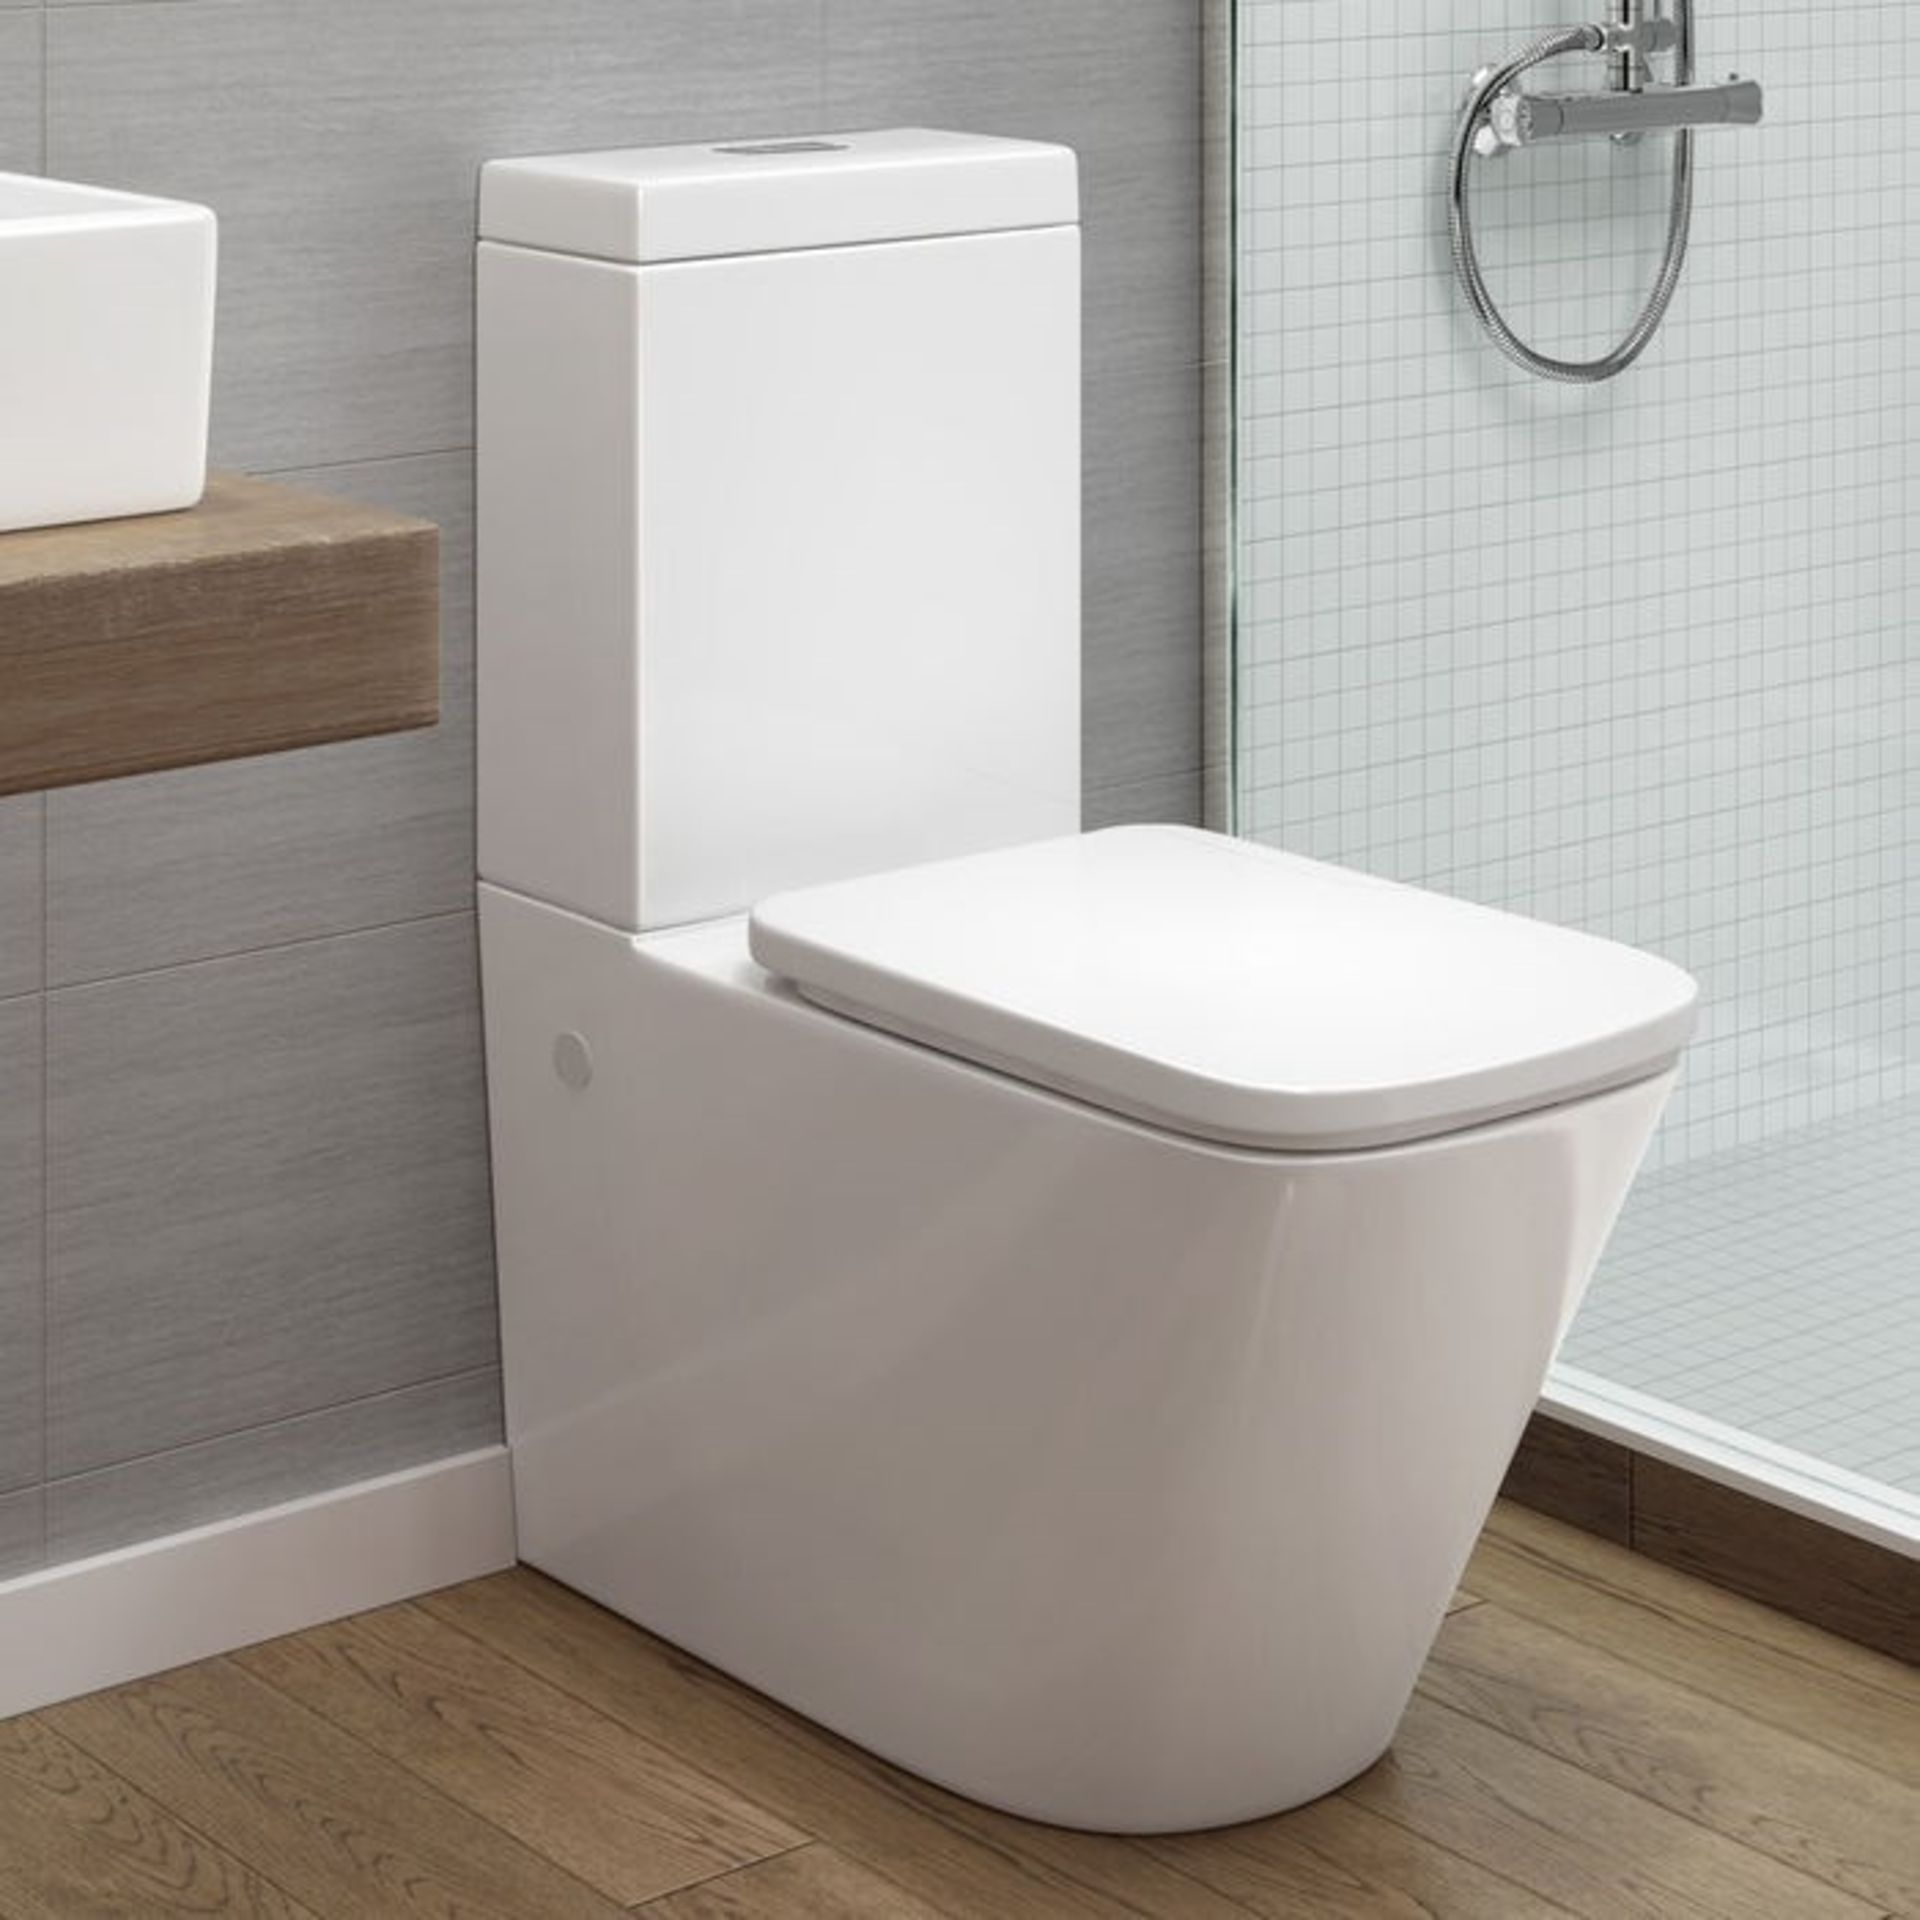 Florence Close Coupled Toilet & Cistern inc Soft Close Seat. Contemporary design finished in a... - Bild 3 aus 3